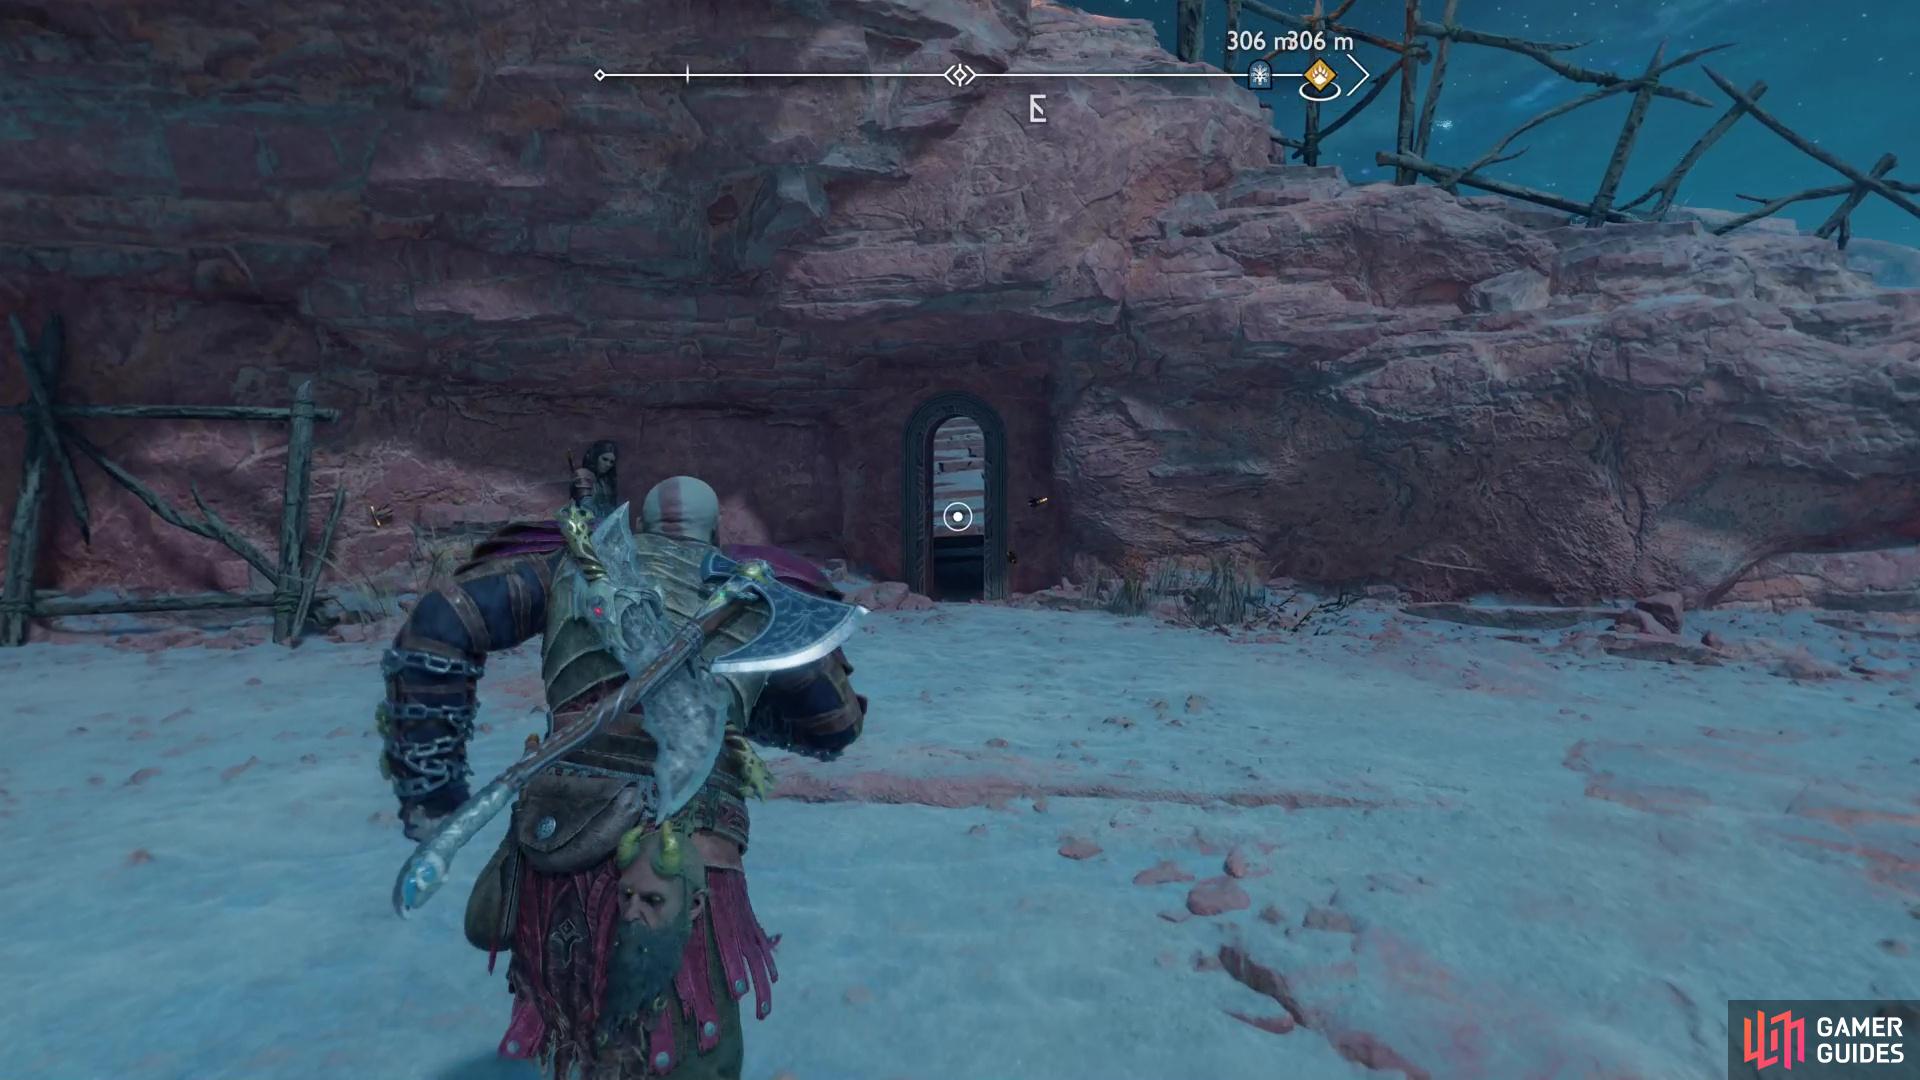 Find a tower along the northern end of The Forbidden Sands and climb up to an elevated ledge, where you can find a door.